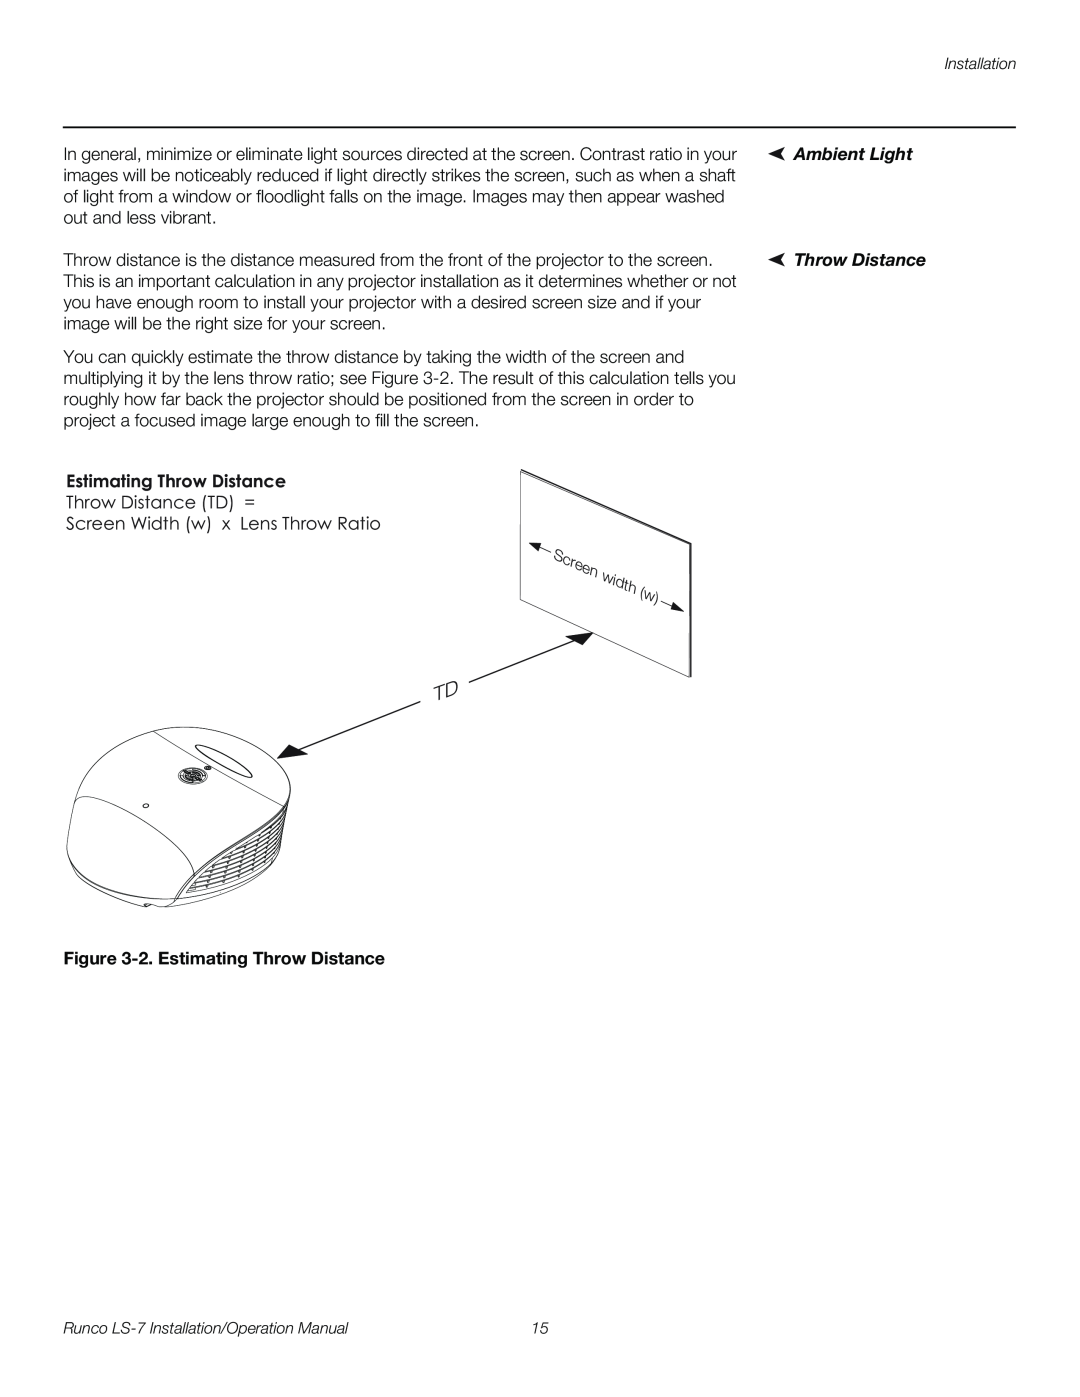 Runco LS-7 operation manual Ambient Light, 2.Estimating Throw Distance 